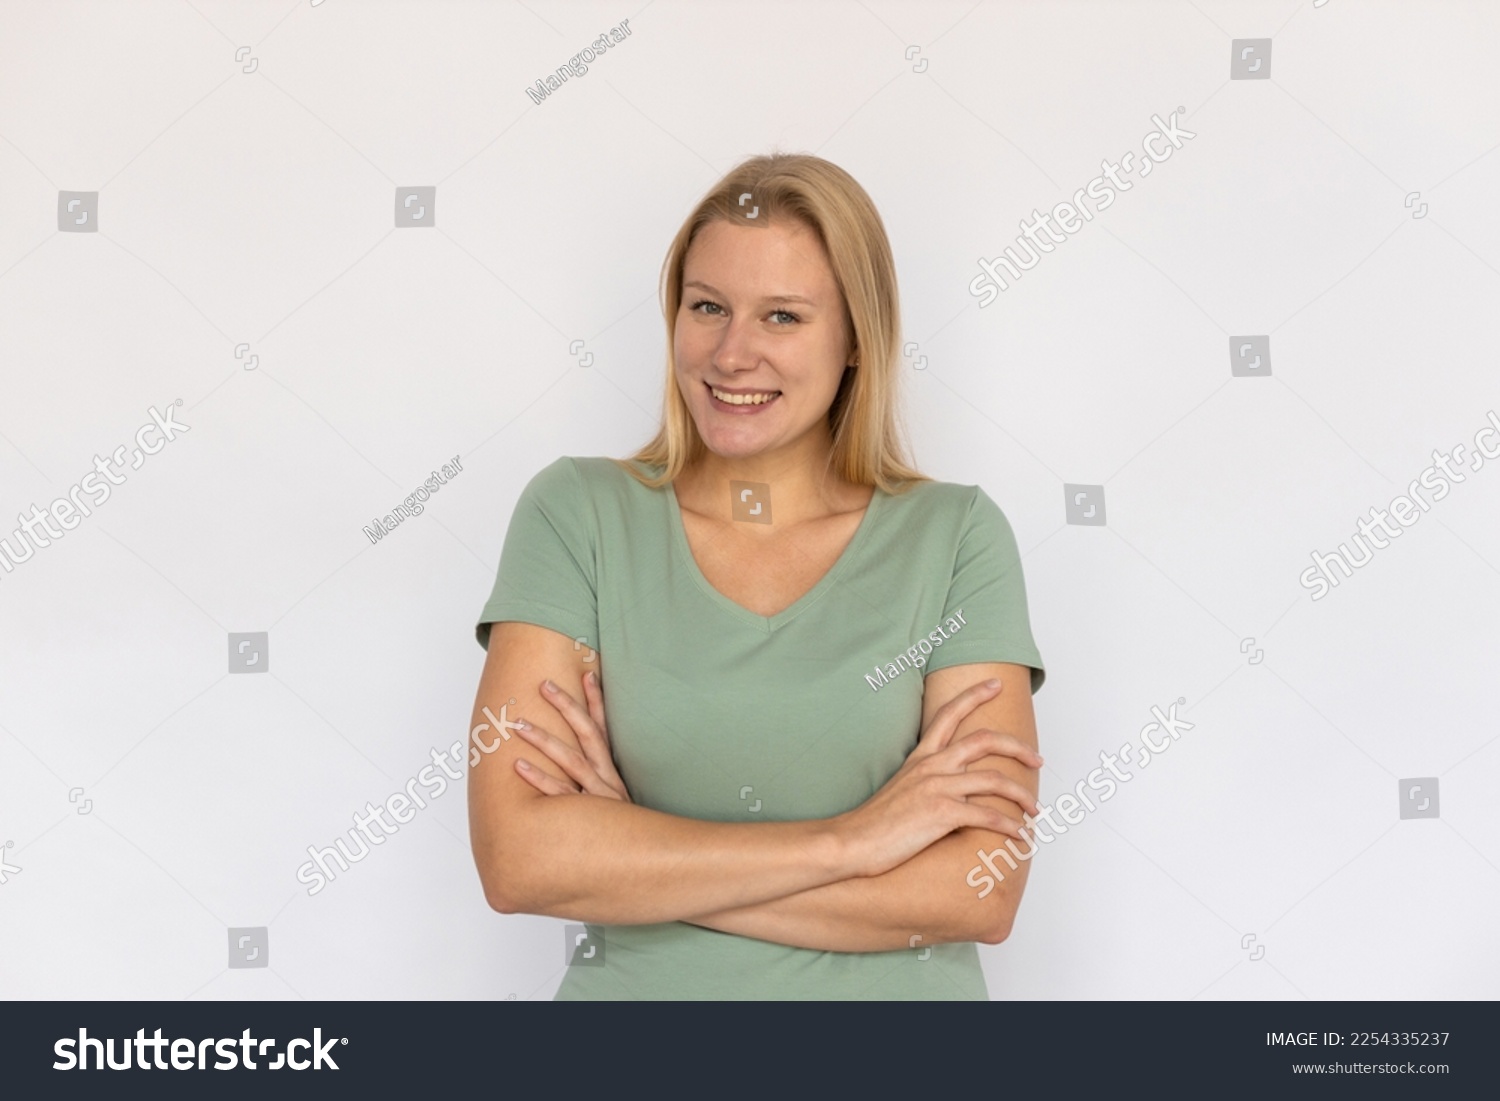 Excited young woman crossing arms. Portrait of happy Caucasian female model with fair hair in green T-shirt looking at camera, smiling, proud of herself. Happiness, success concept #2254335237